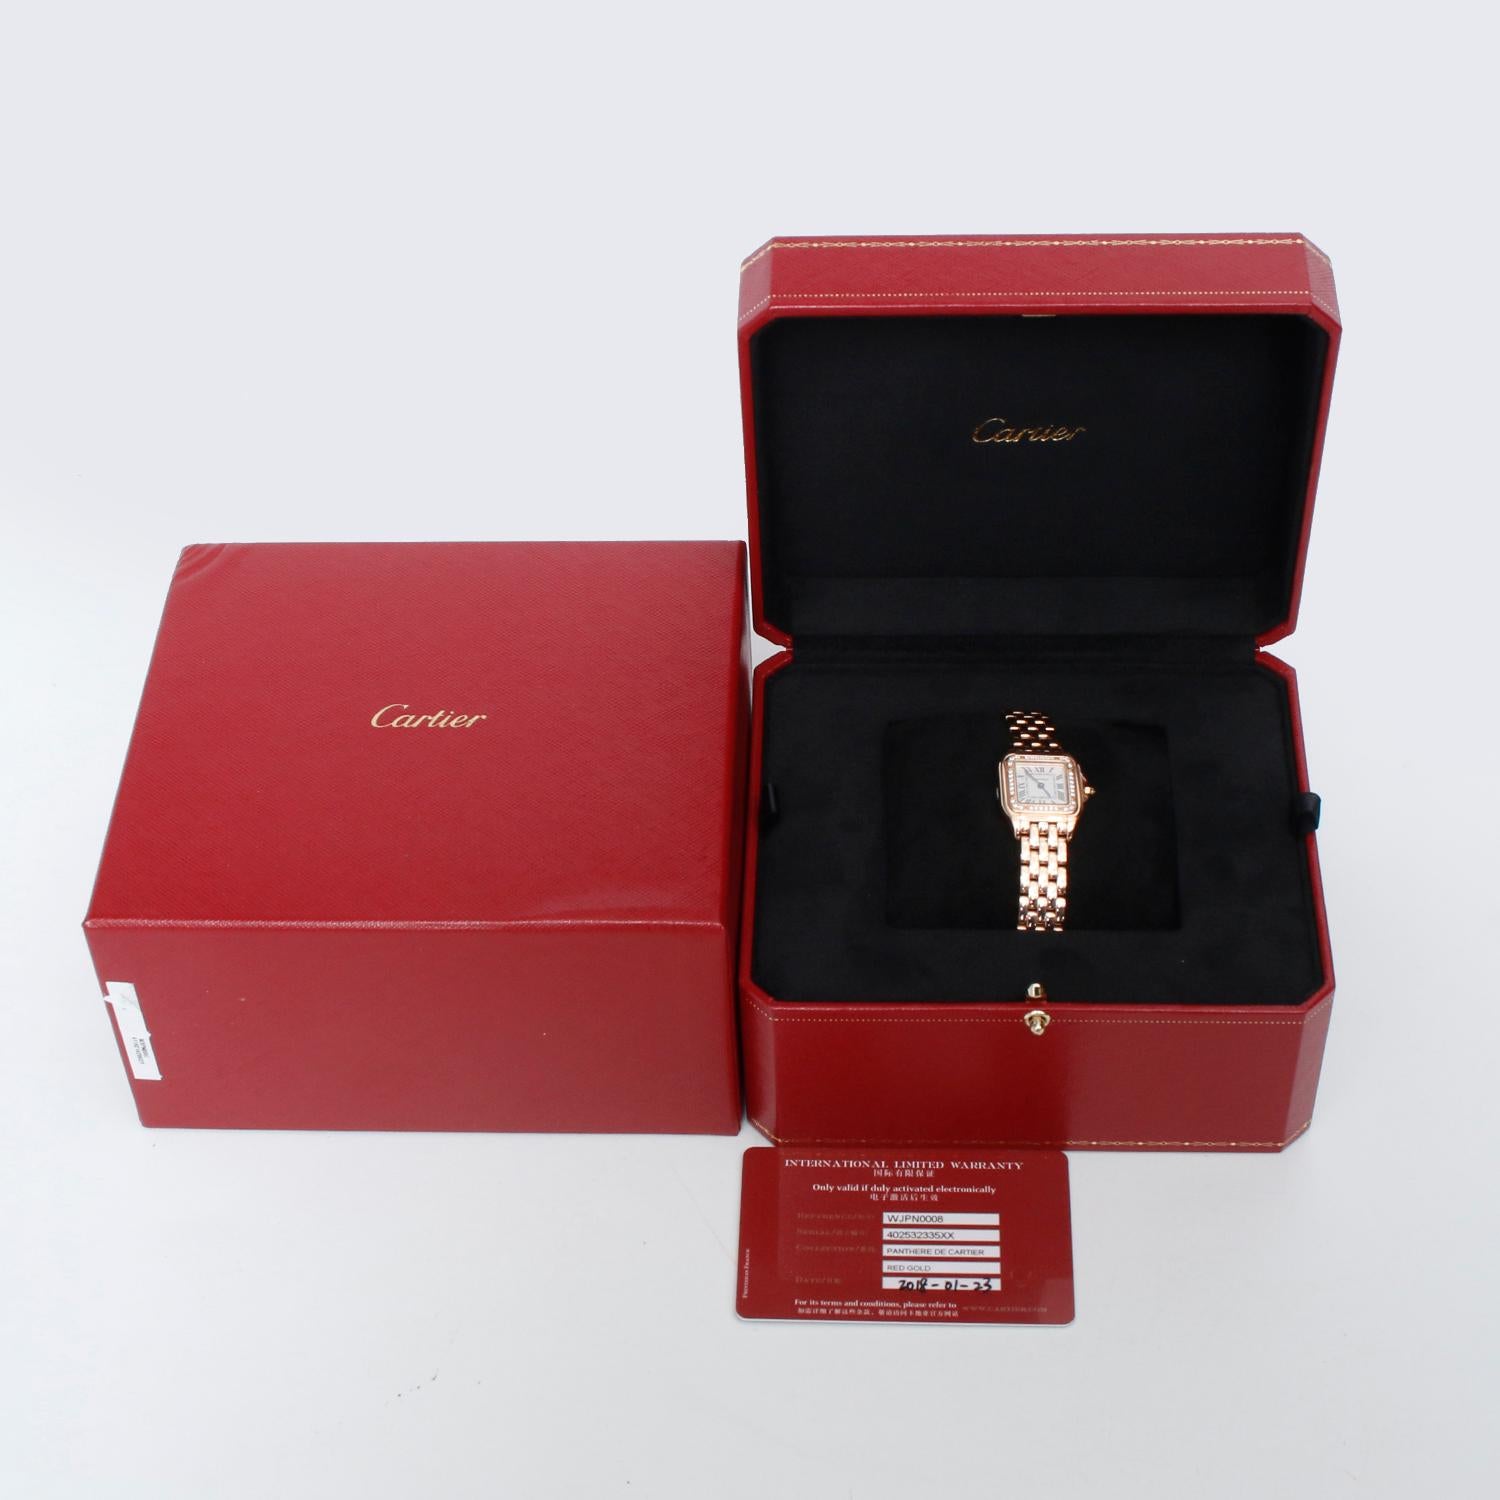 Cartier Rose Gold Small Panther With Diamonds Ladies Watch  - Quartz. 18K Rose Gold with brilliant cut diamond bezel  ( 22 x 30 mm ) . Silver dial with black roman numerals . 18K Rose Gold bracelet . Pre-owned with Cartier box with card. Dated 2018.